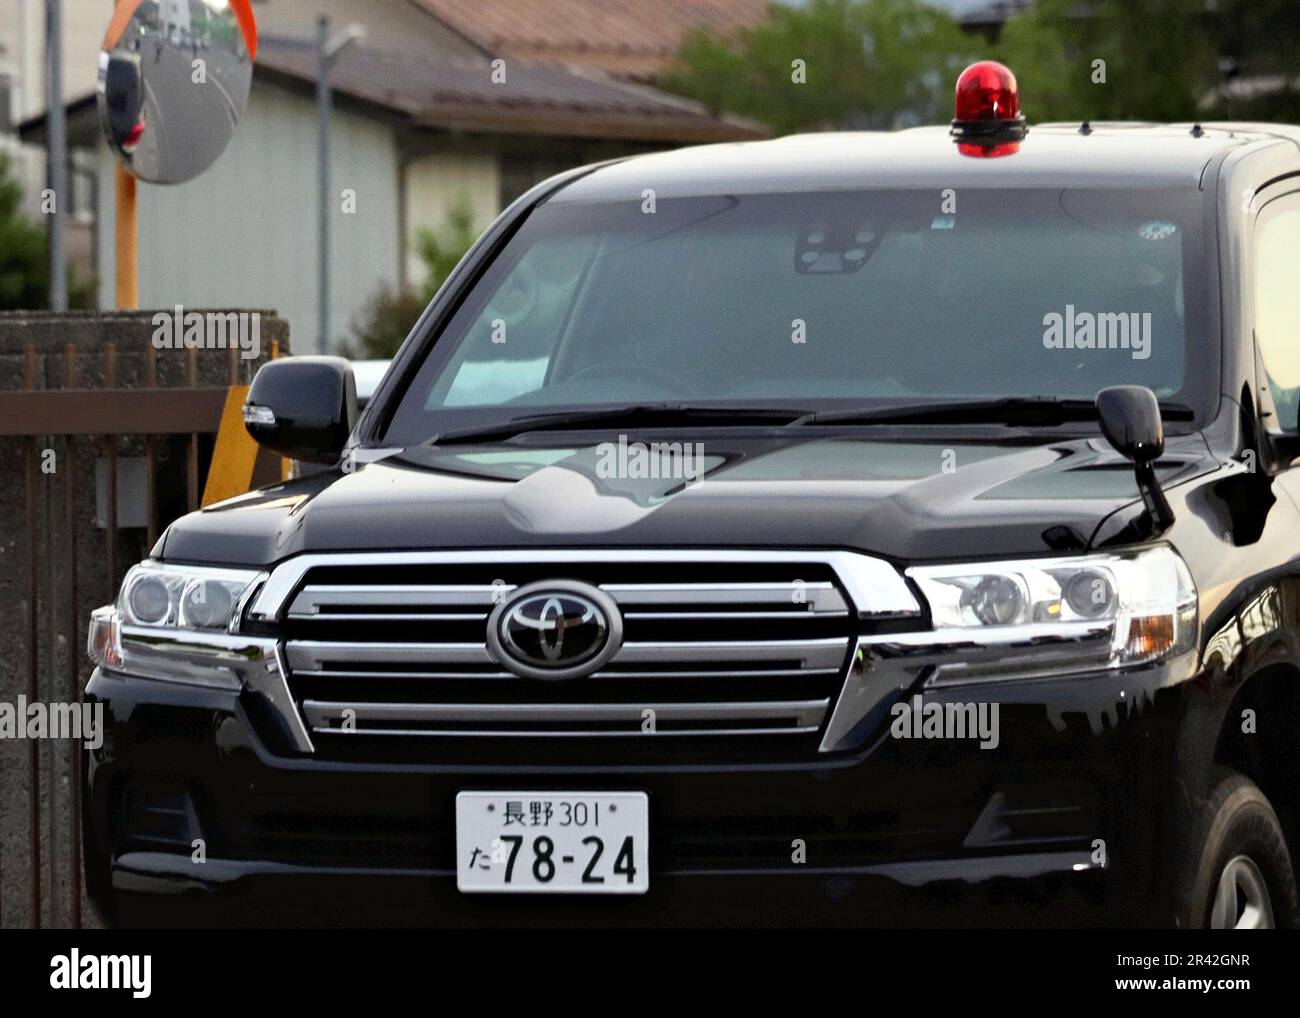 A car carrying a suspect arrives at Nakano Police Station in Nakano City, Nagano Prefecture on May 26, 2023. Nagano prefectural police on the same day early morning detained a man who barricaded himself inside a house in Nakano, Nagano Prefecture, after allegedly killing two male police officers and a woman on the previous day. Another woman, the fourth victim, was confirmed dead on the same day morning. The man reportedly came out of the house on his own a little after 4:30 a.m. same day, and the police transported him to Nakano Police Station in a police vehicle.The man is believed to be the Stock Photo